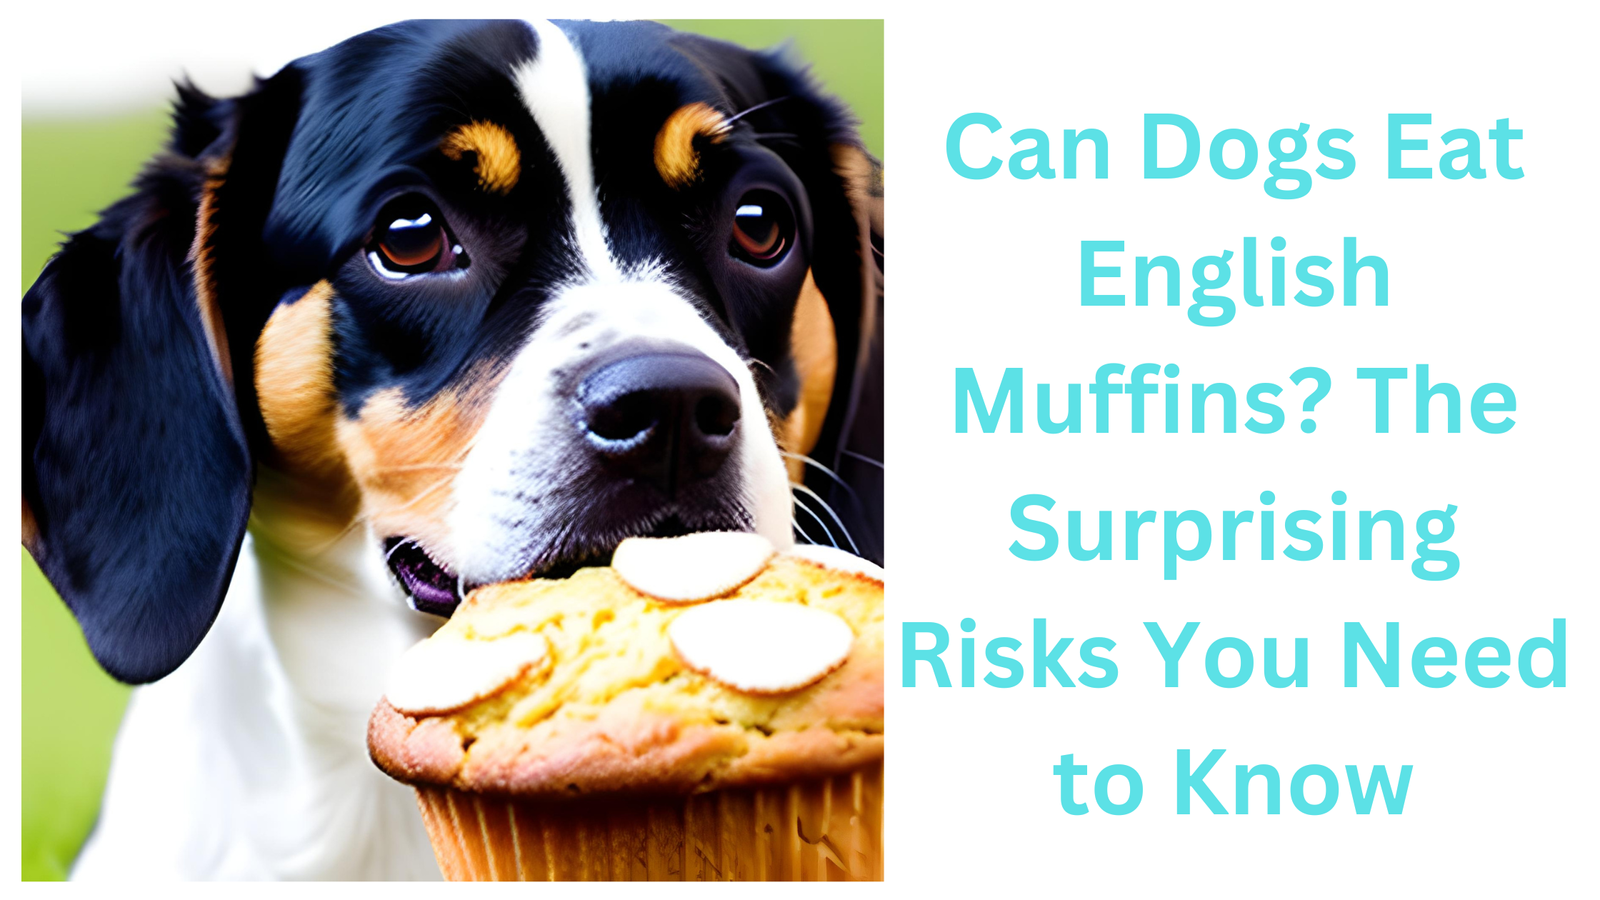 Can Dogs Eat English Muffins? The Surprising Risks You Need to Know